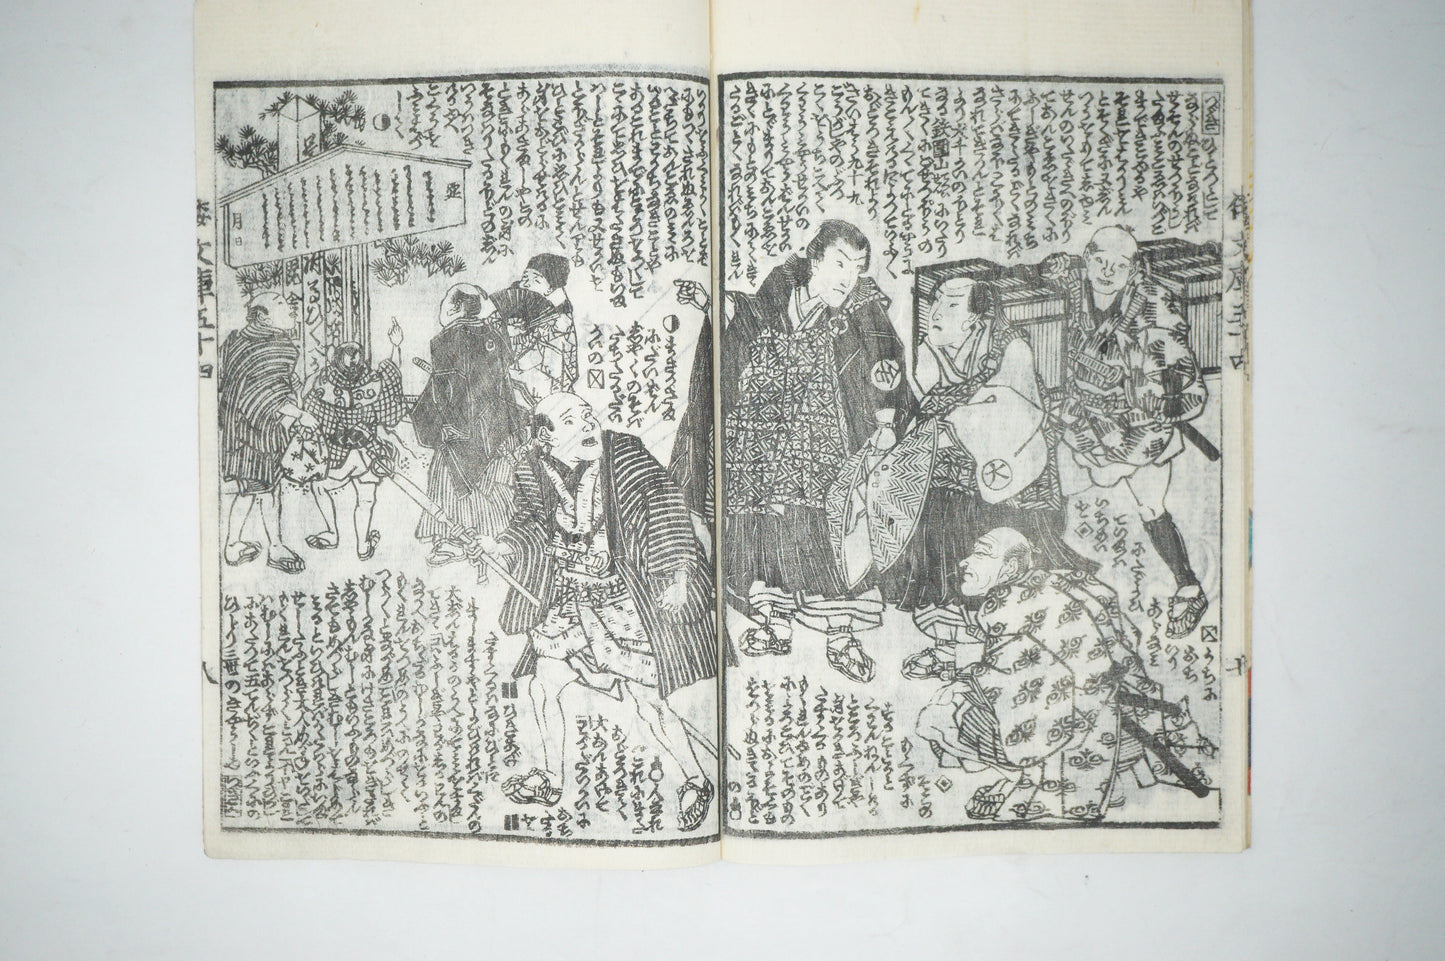 Antique Japanese Manga Book with detailed Woodblock Printed Images from Japan 0928D14